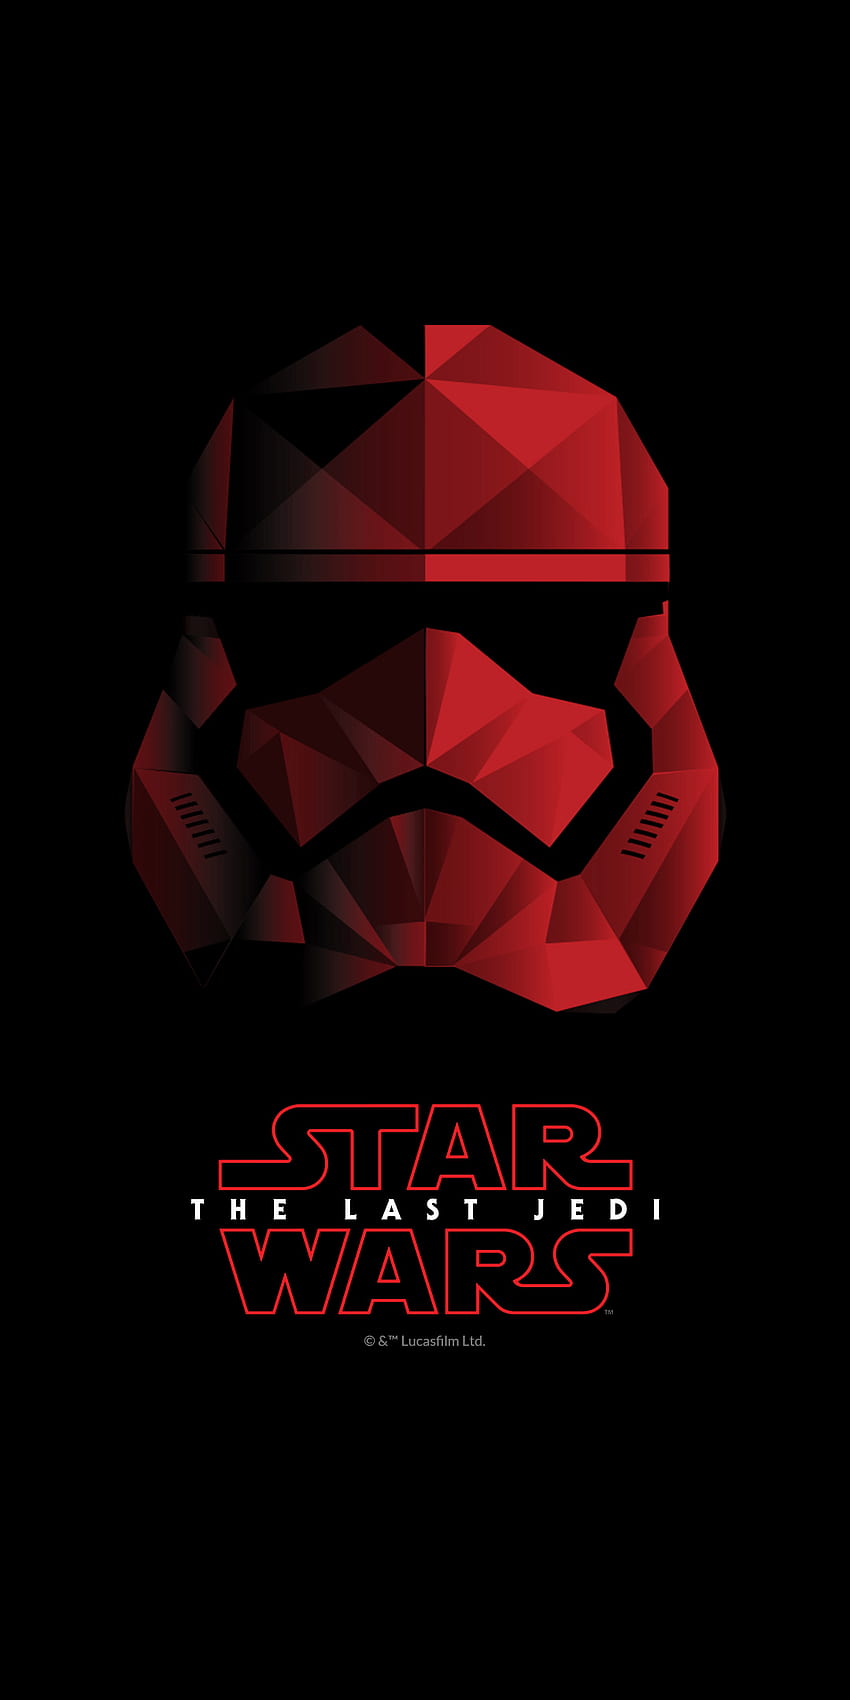 Get all the Star Wars: The Last Jedi from the special, Imperial Star Wars HD phone wallpaper